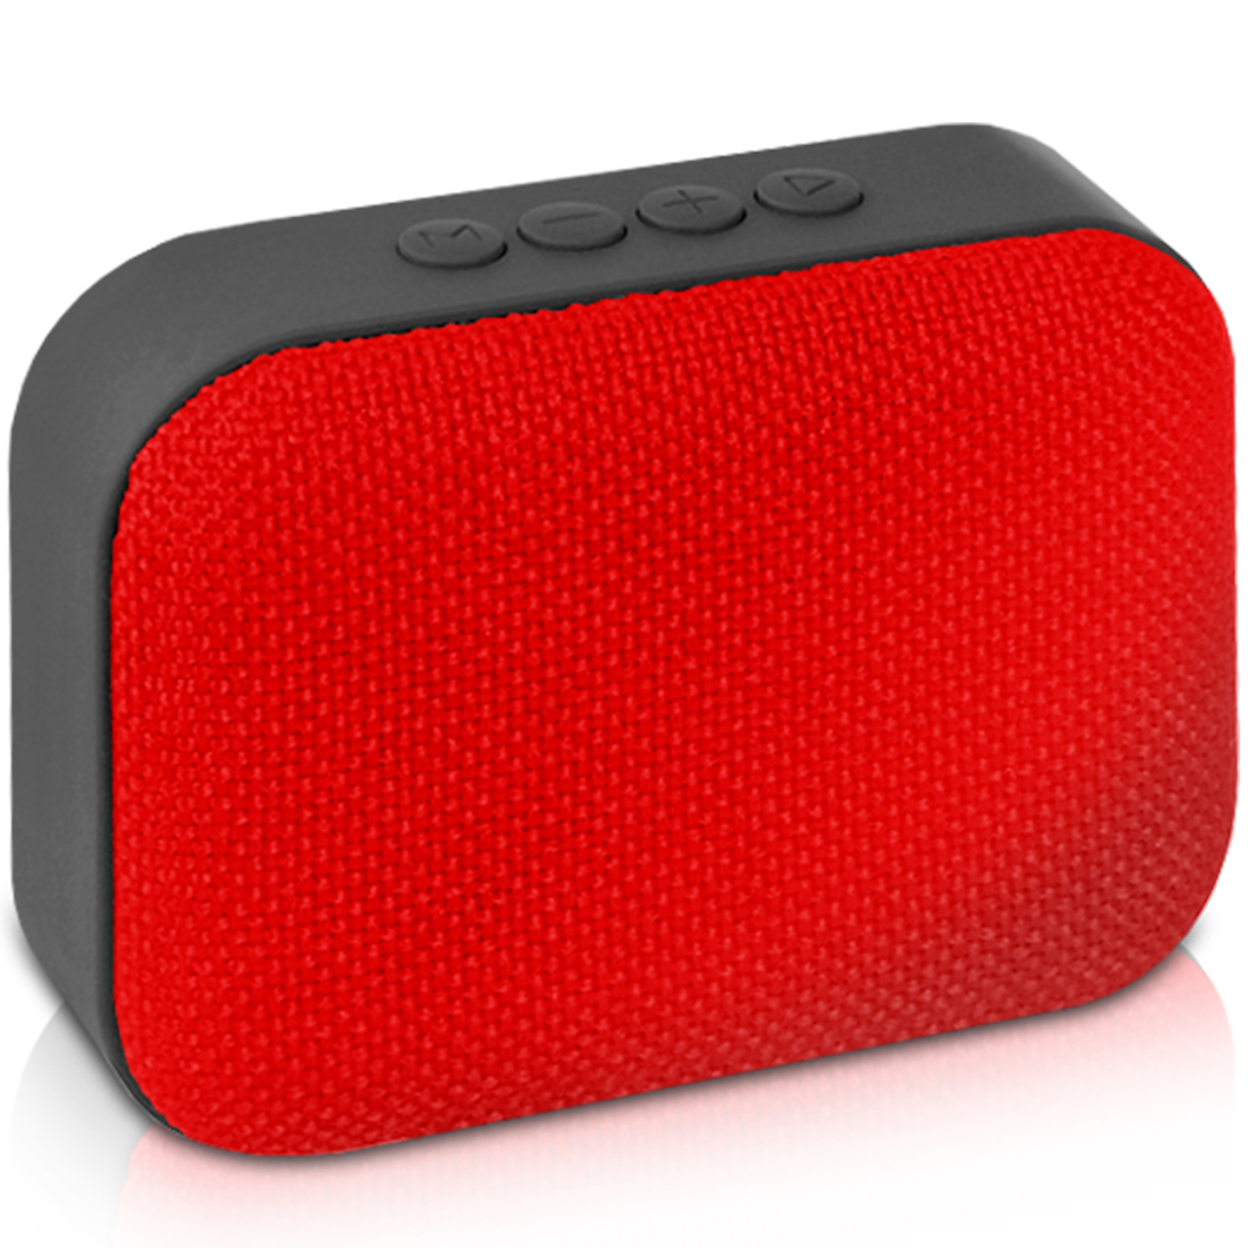 Technical Pro Portable Rechargeable Bluetooth Speaker With FM Radio, For Home And Travel (Red)